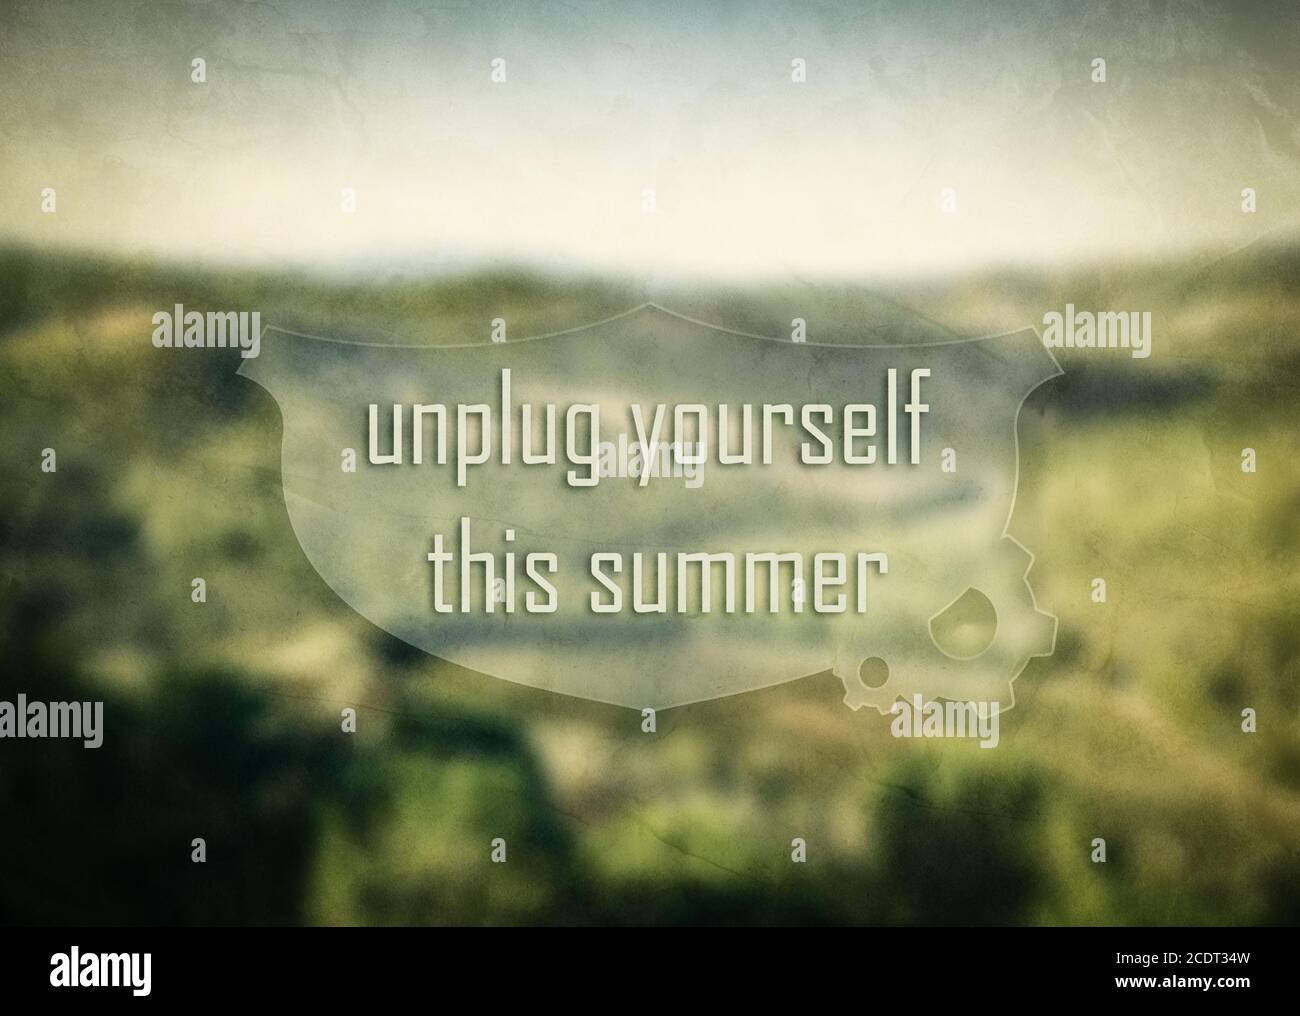 quot;Unplug yourself this summerquot; inspirational, motivational message on nature blurred background Stock Photo